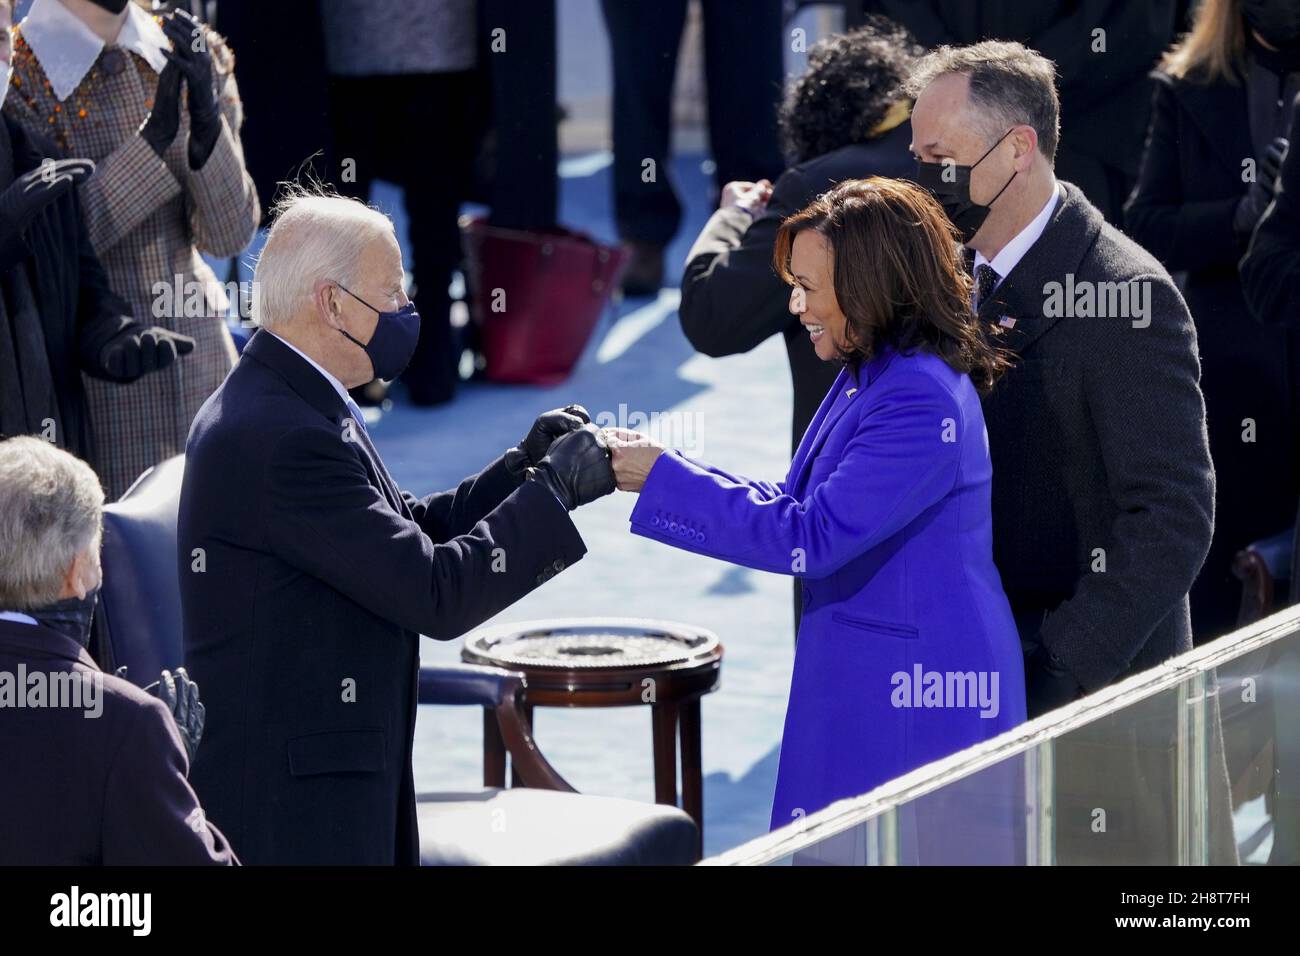 Washington, United States. 02nd Dec, 2021. U.S. President Joe Biden, left, fist bumps Vice President Kamala Harris during the 59th presidential inauguration in Washington, DC, on Wednesday, January 20, 2021. Biden will propose a broad immigration overhaul on his first day as president, including a shortened pathway to U.S. citizenship for undocumented migrants - a complete reversal from Donald Trump's immigration restrictions and crackdowns, but one that faces major roadblocks in Congress. Photo by Kevin Dietsch/UPI Credit: UPI/Alamy Live News Stock Photo